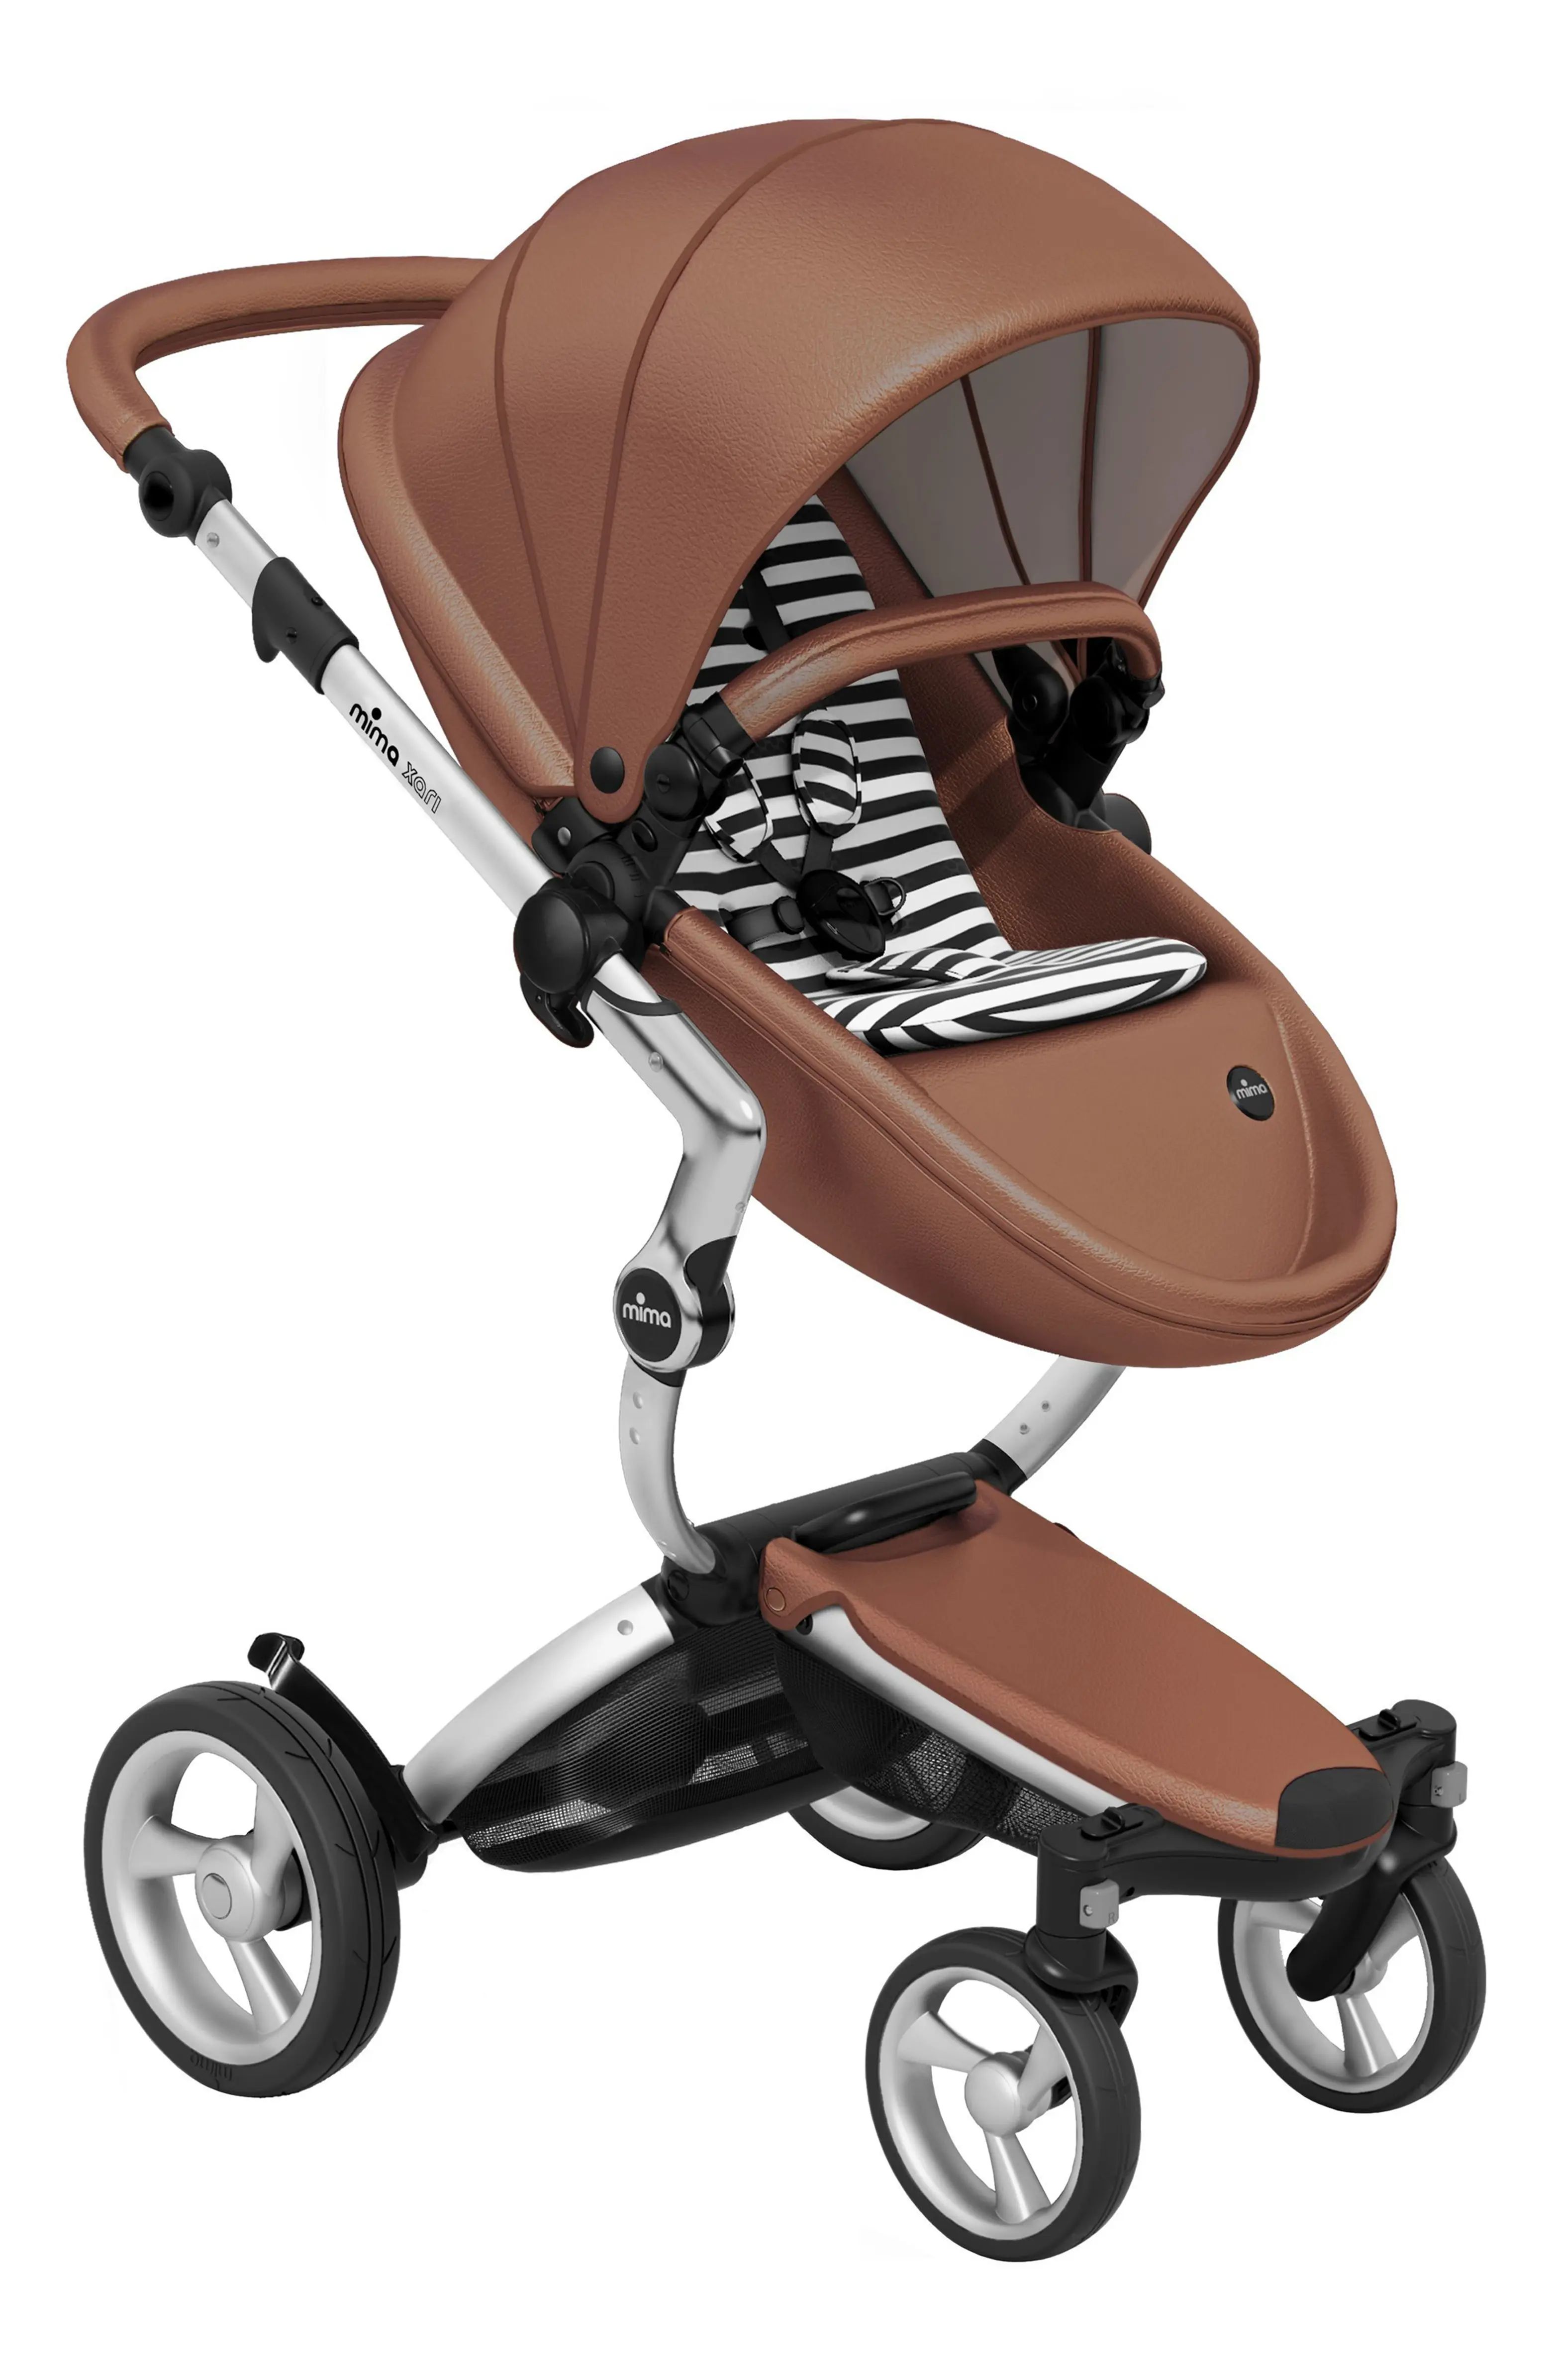 Xari Aluminum Chassis Stroller with Reversible Reclining Seat & Carrycot | Nordstrom